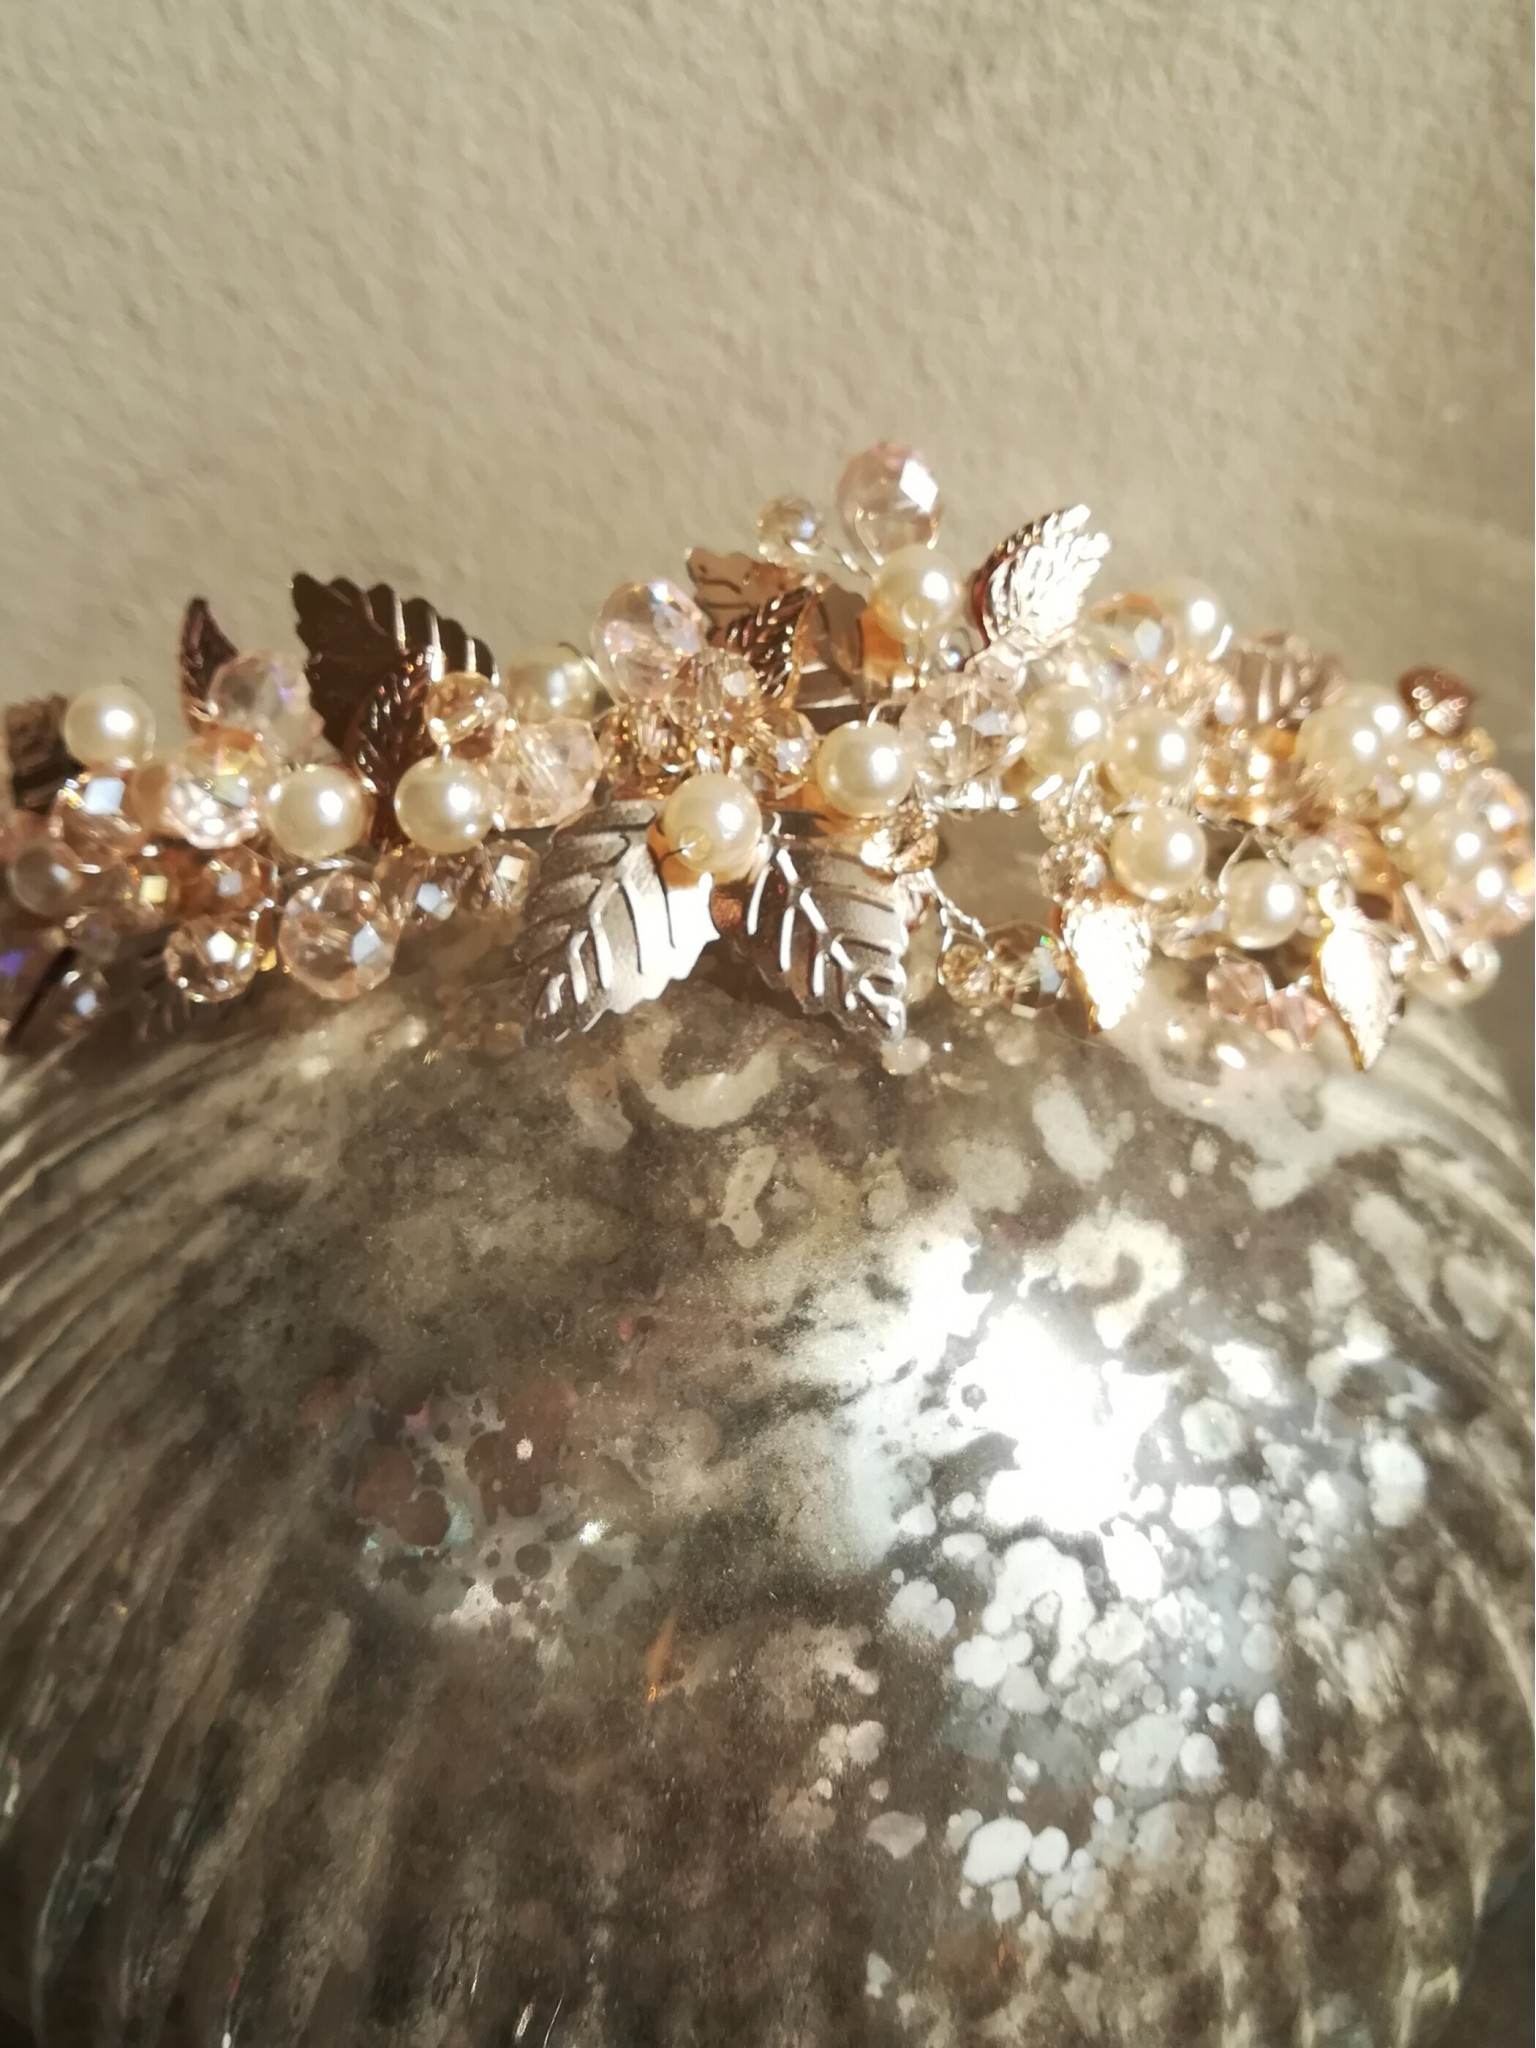  Stylish Rose Gold and Peach Tiara with Crystals and Leaves - Rose Gold Deluxe